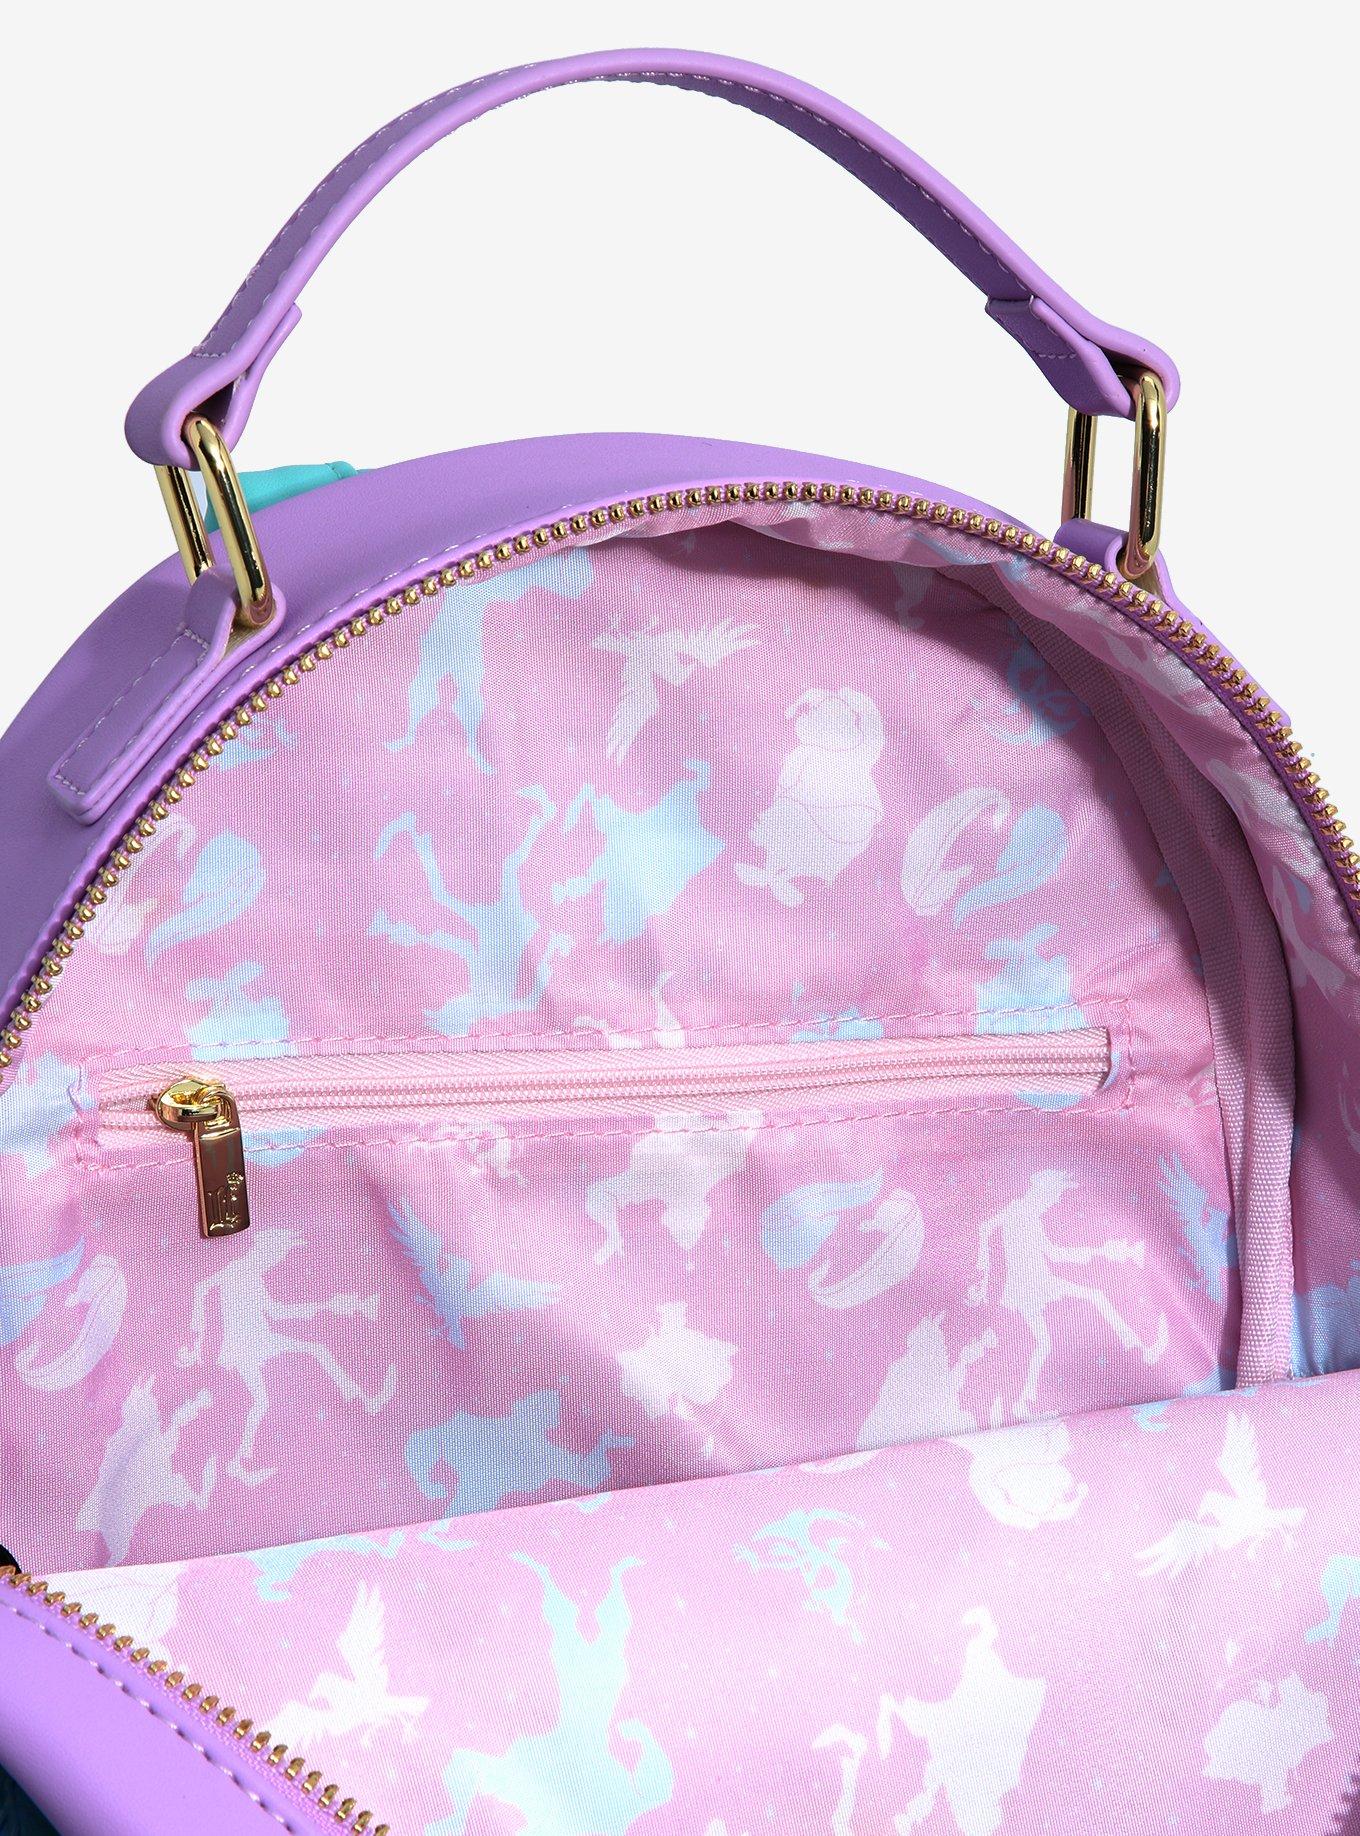 Loungefly Disney Villains Constellations Mini Backpack - BoxLunch Exclusive